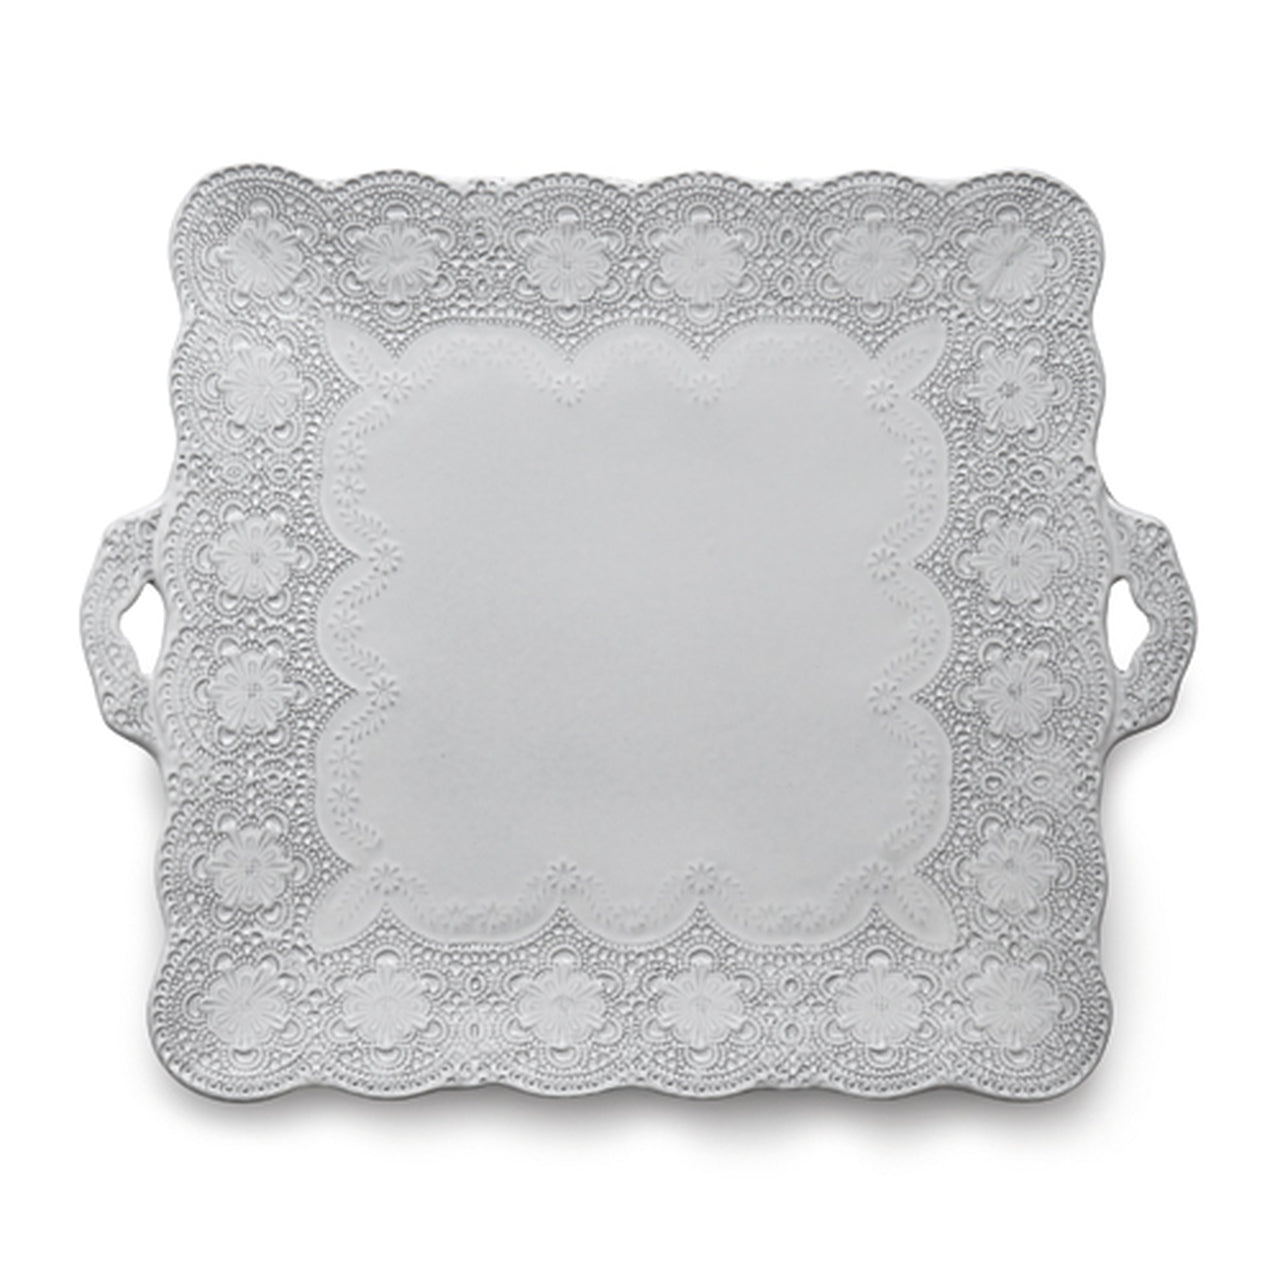 Merletto White Square Platter with Handles